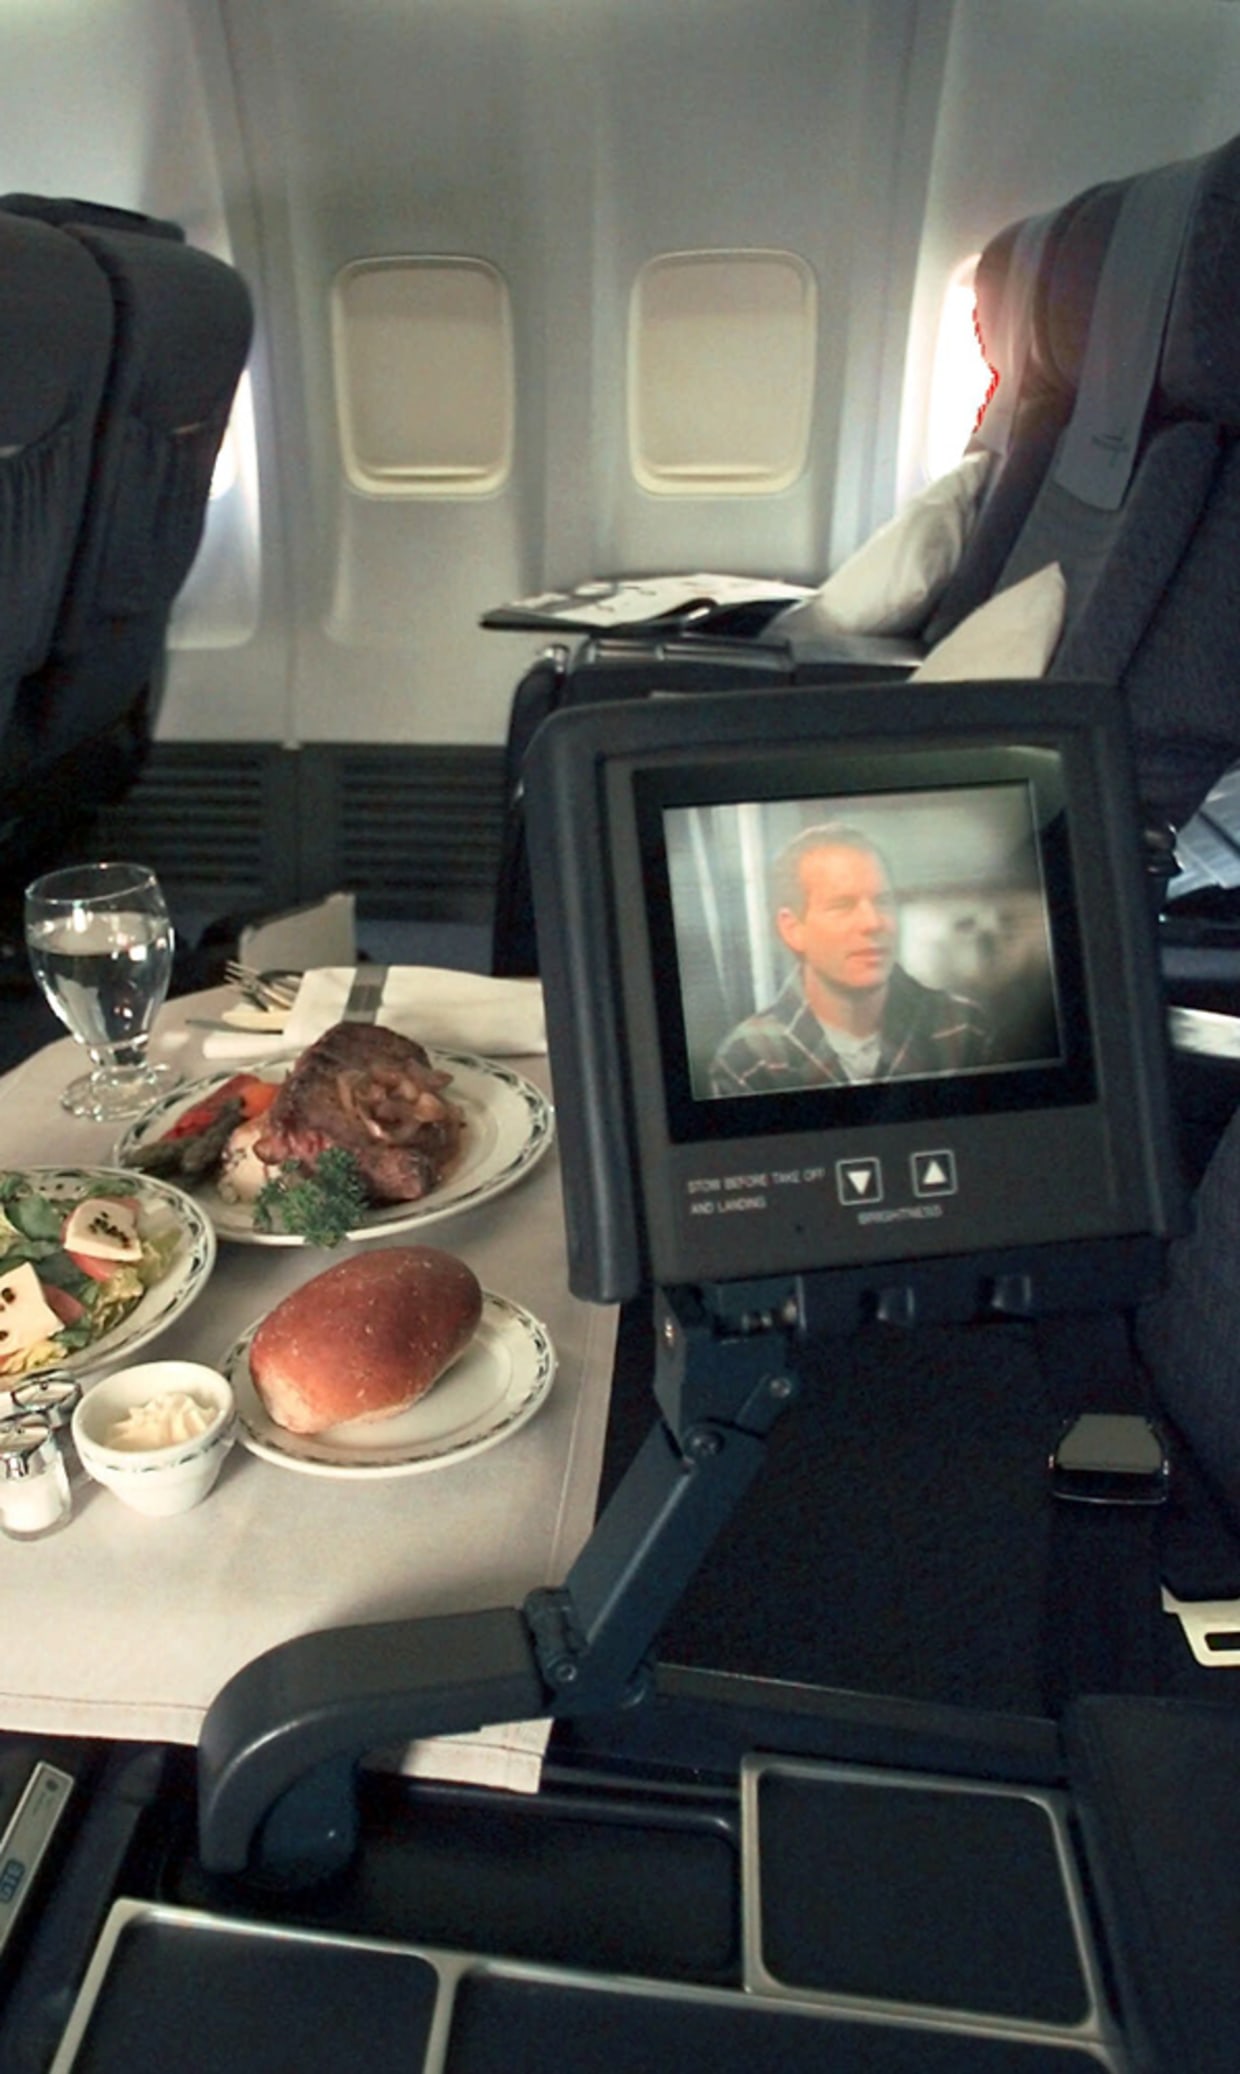 How to watch the in-flight movie